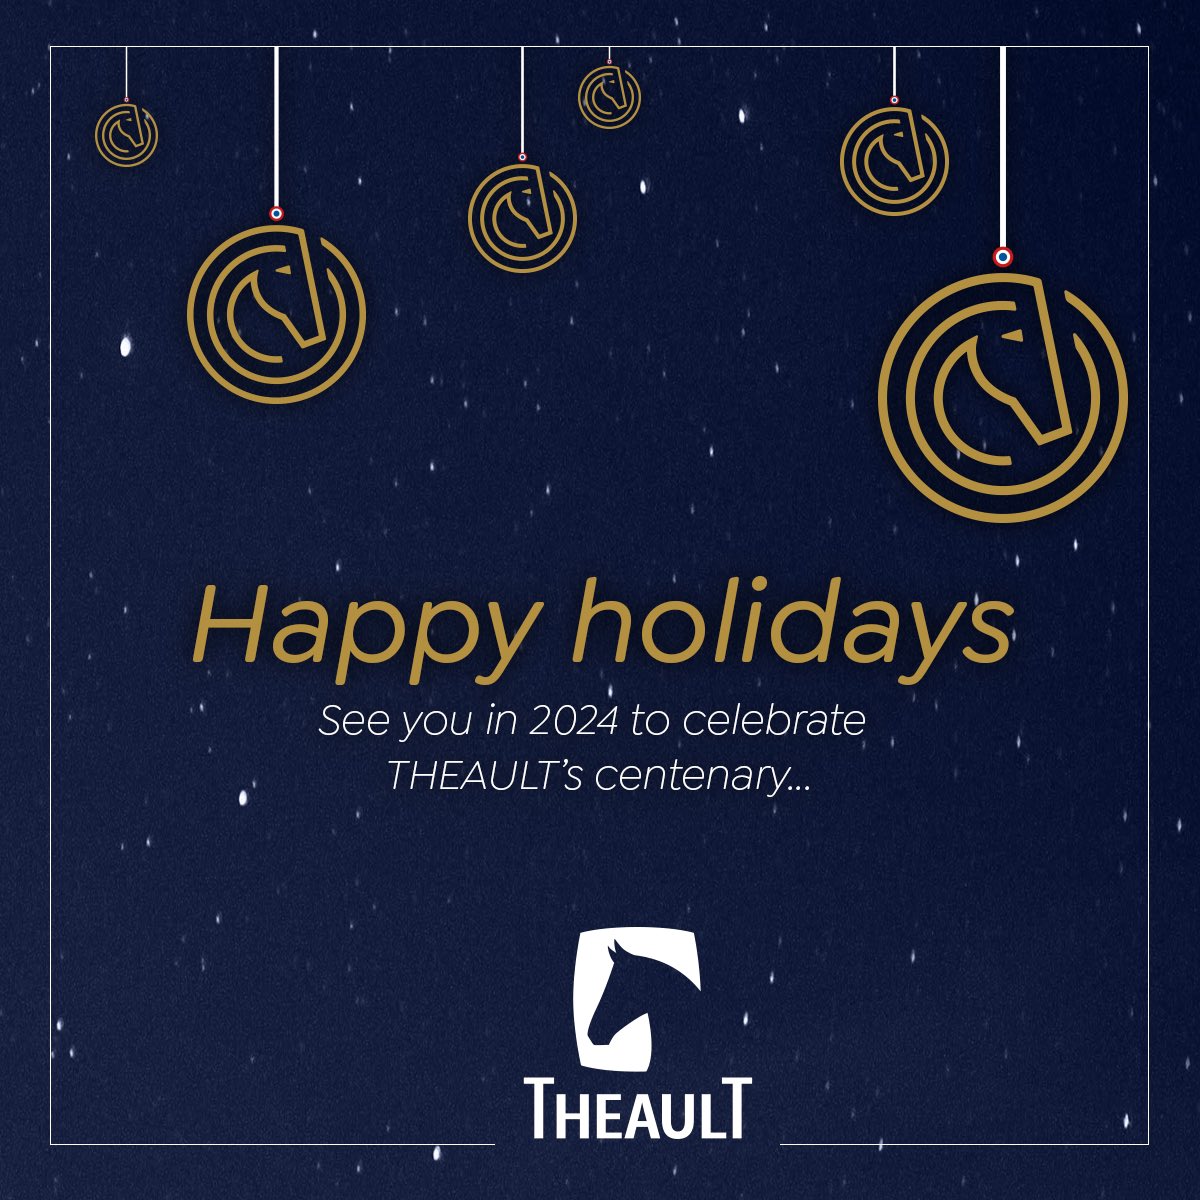 The Theault team wishes you a very happy festive season and looks forward to seeing you next year. ✨

#since1924#DesignedAndMadeInAustralia#MyTheault